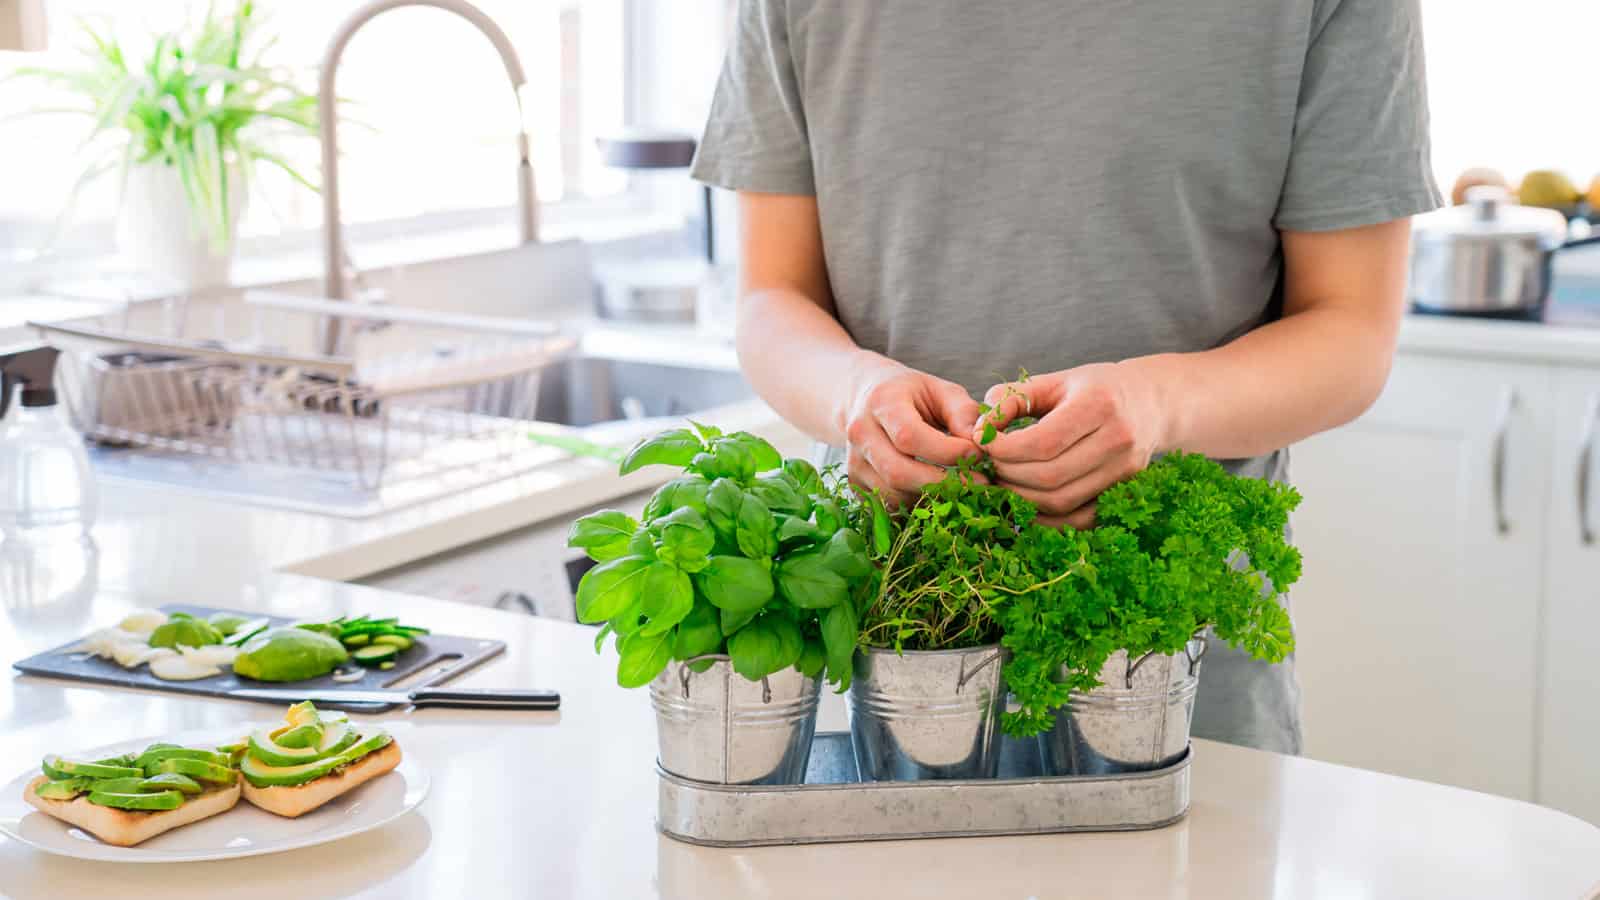 Man picking herbs from his homegrown herb plants on the countertop